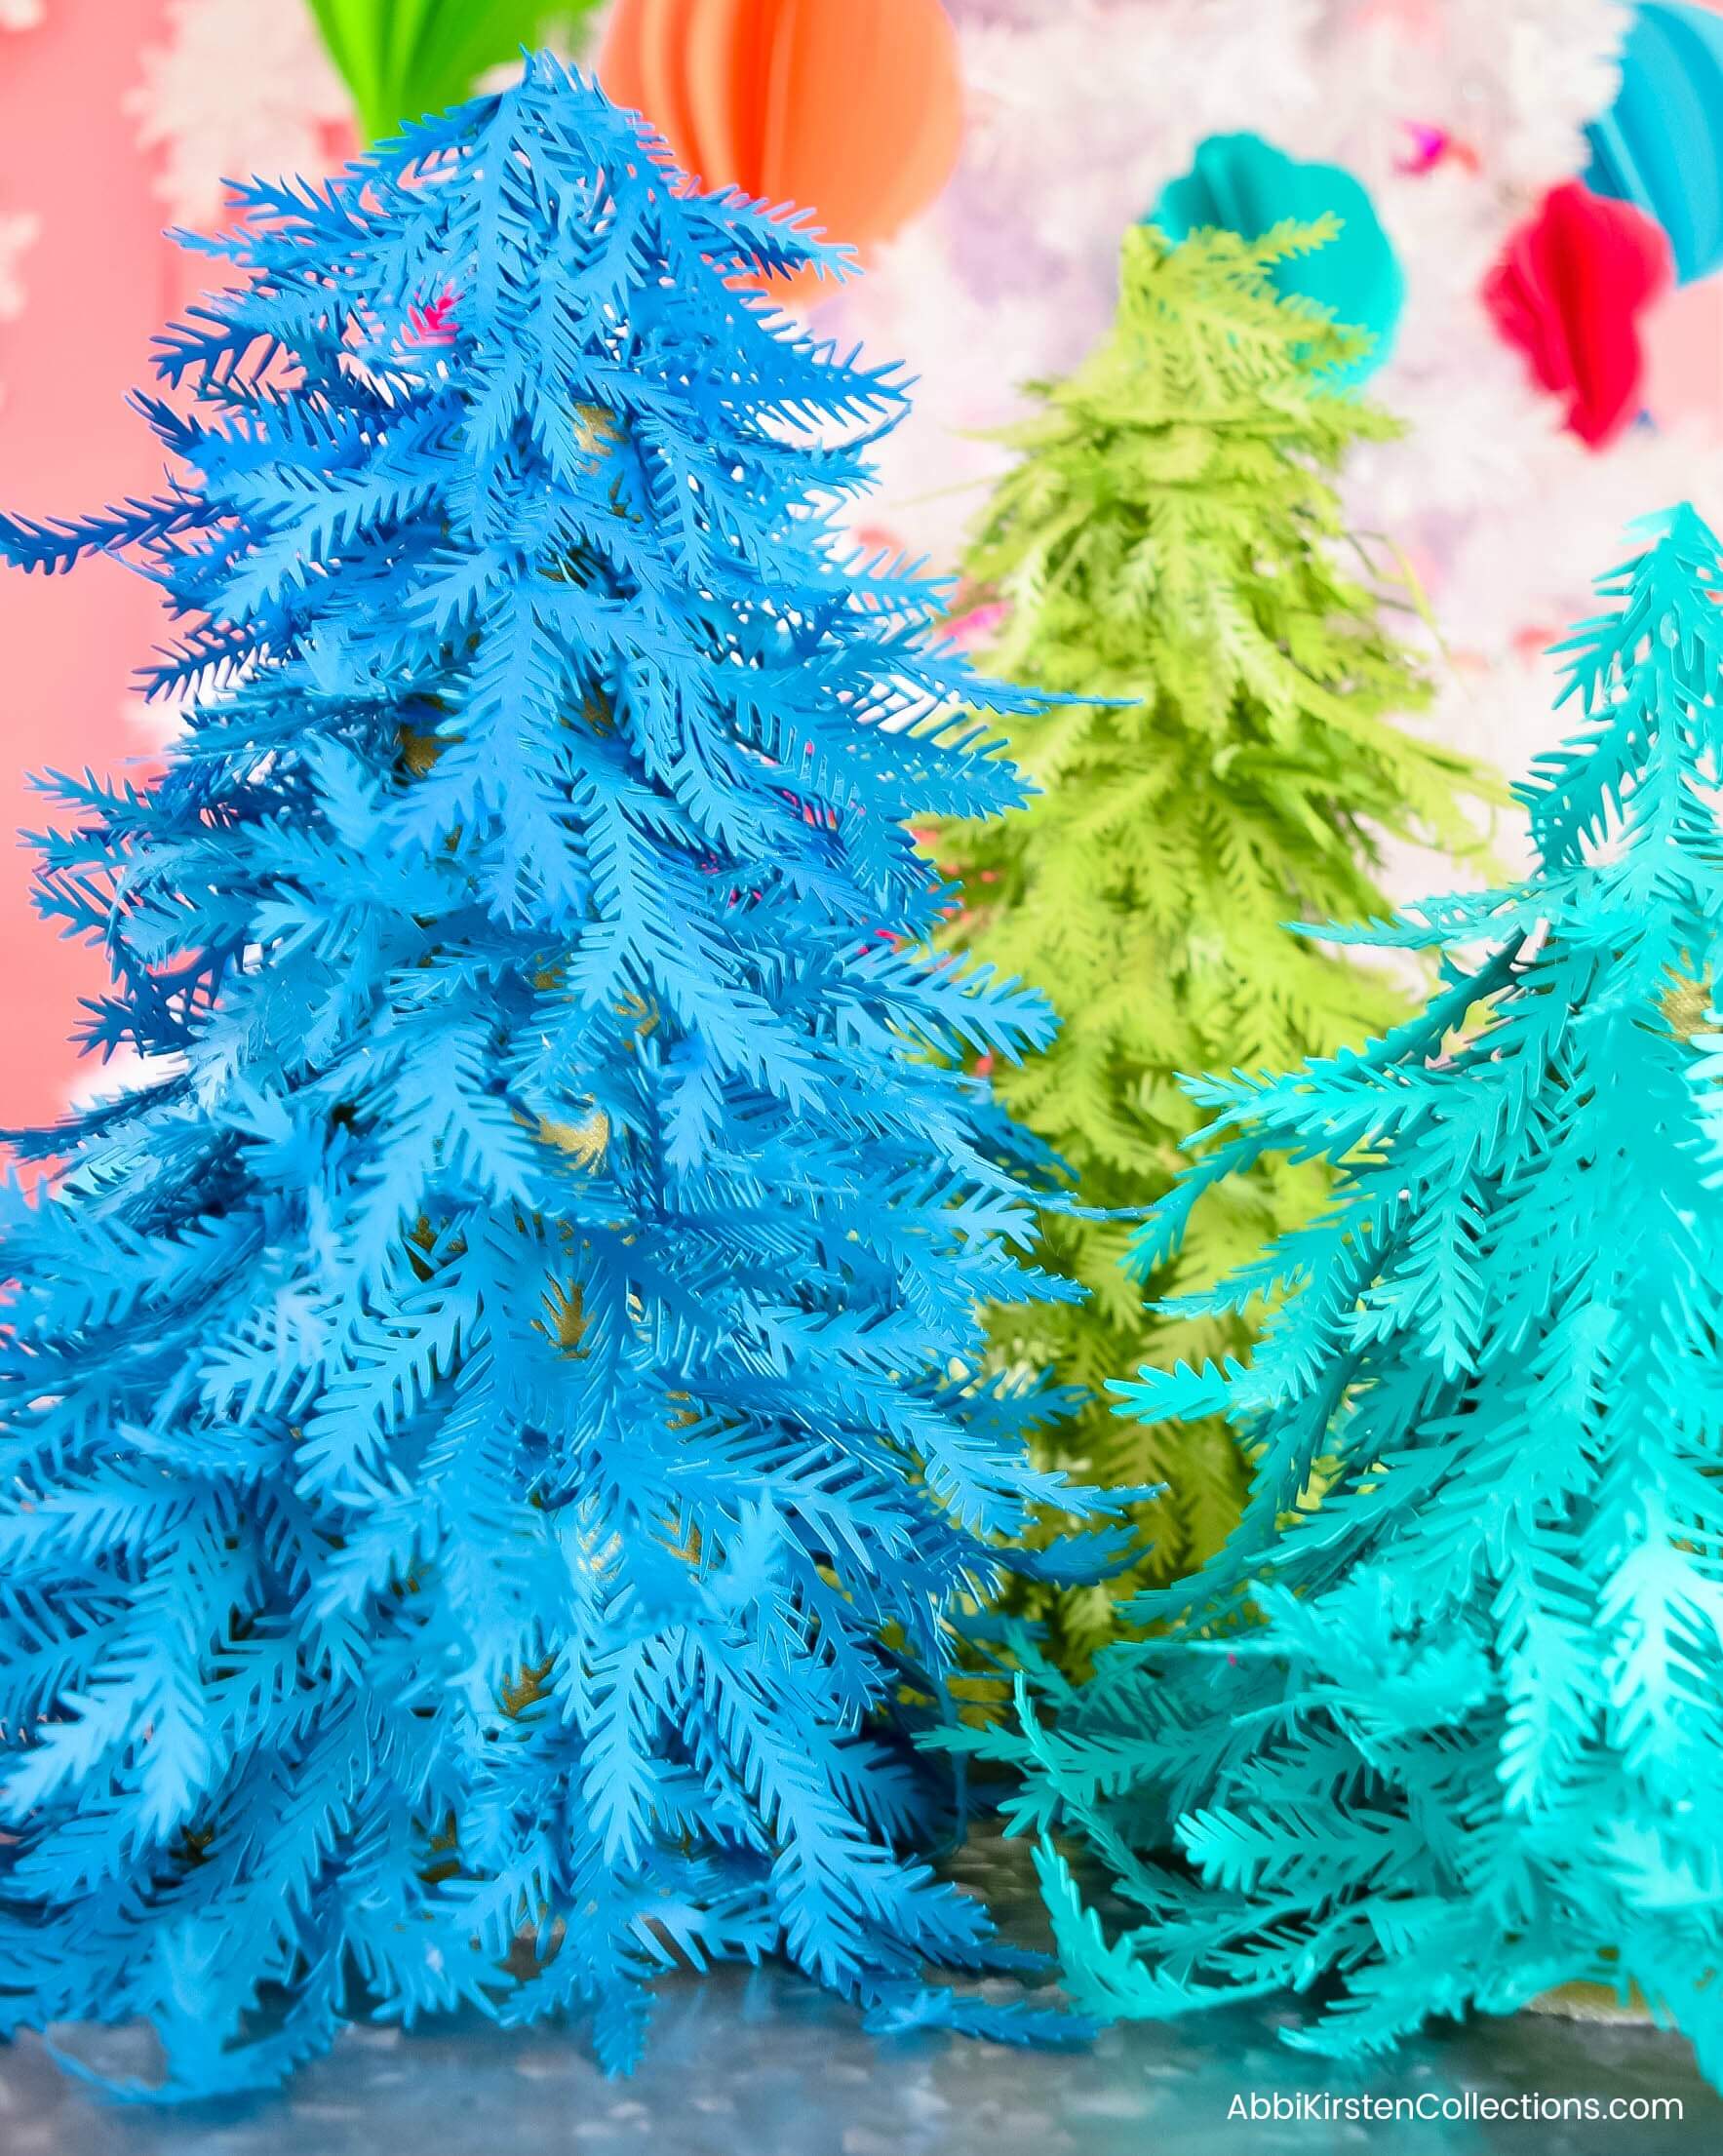 Three colorful paper Christmas trees made with blue, teal, and green paper stand in front of a festive background.